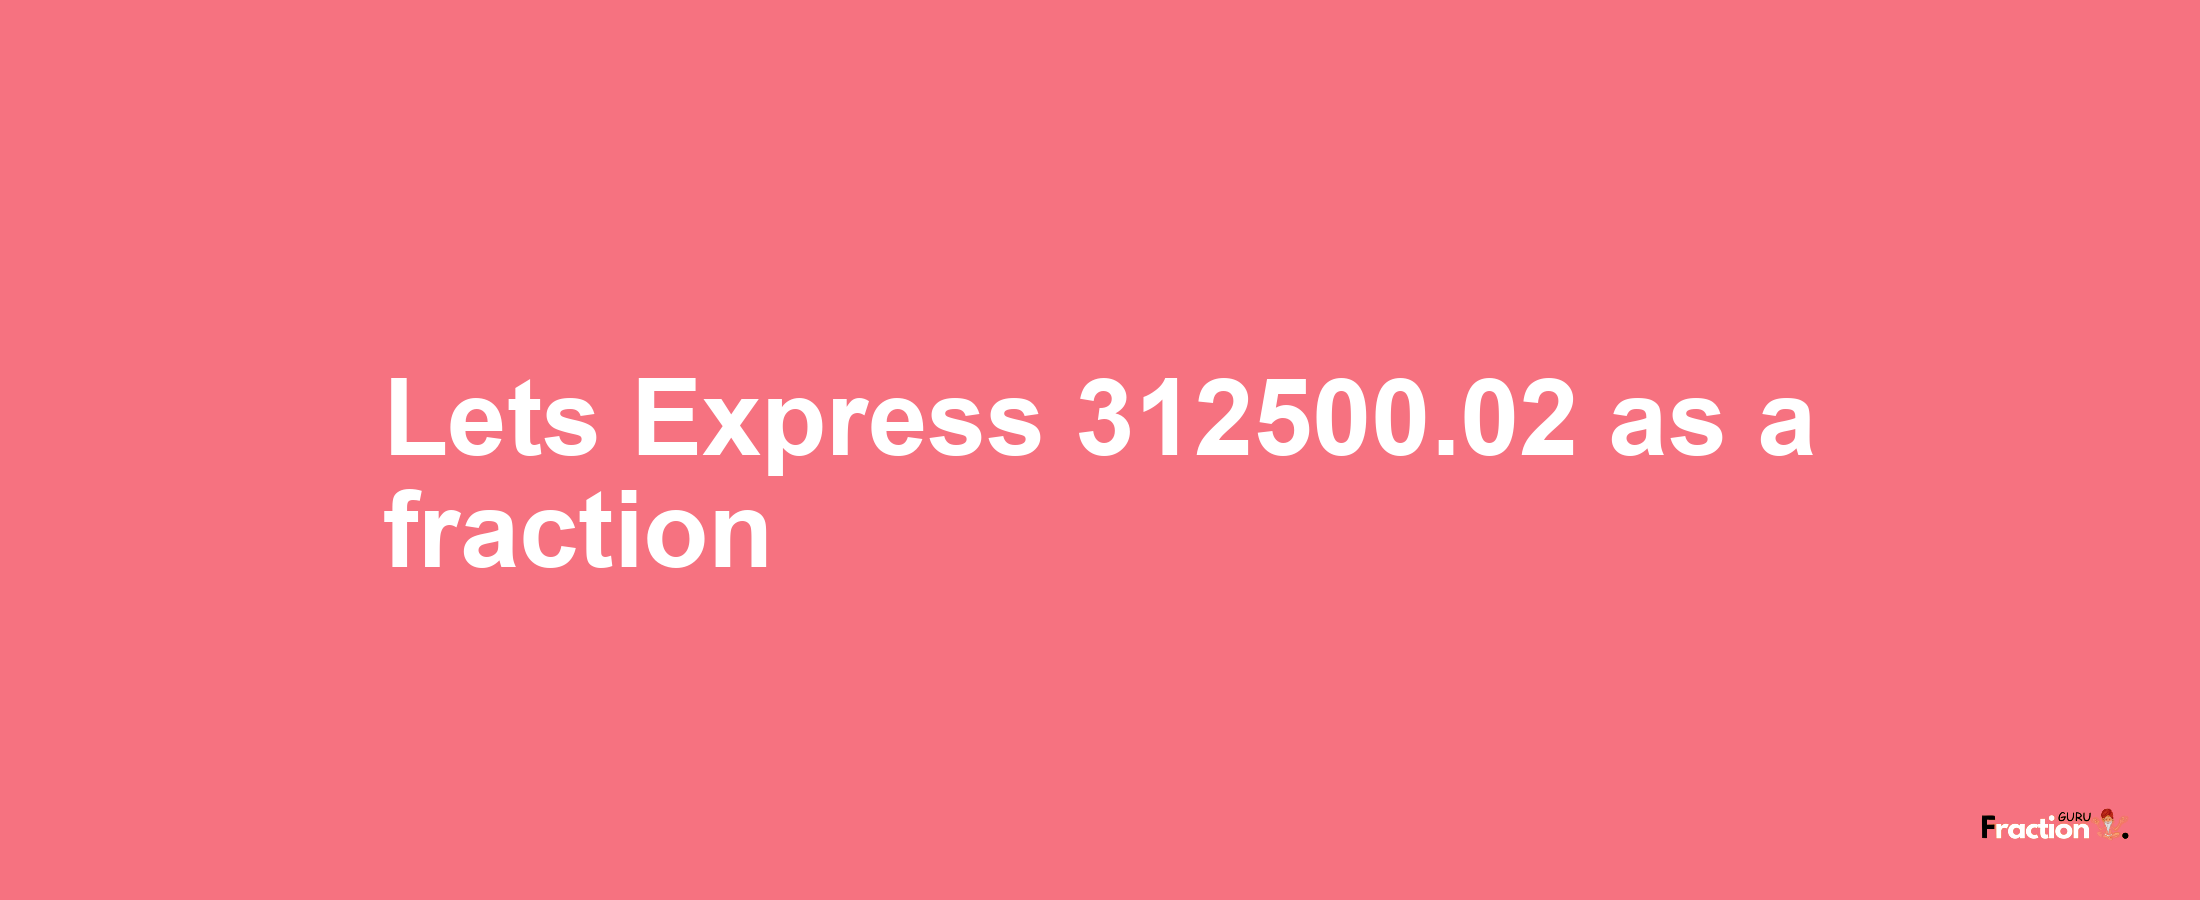 Lets Express 312500.02 as afraction